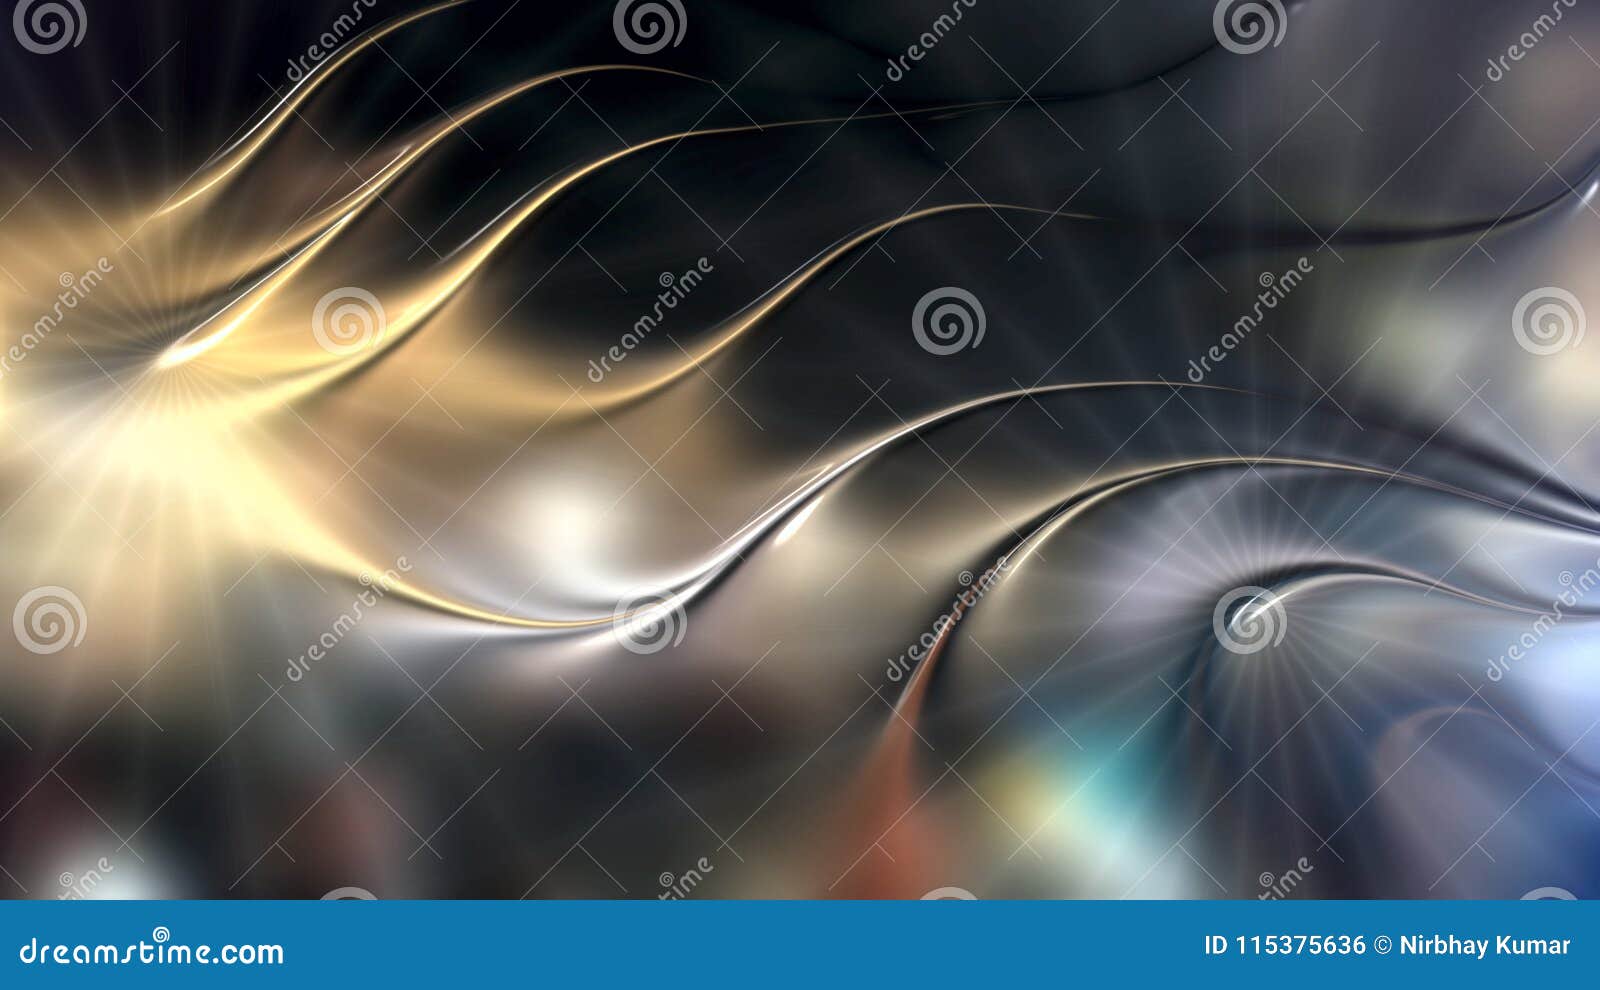 Abstract Metallic 3d Wave Background Stock Photo - Image of diagonal,  fashion: 115375636